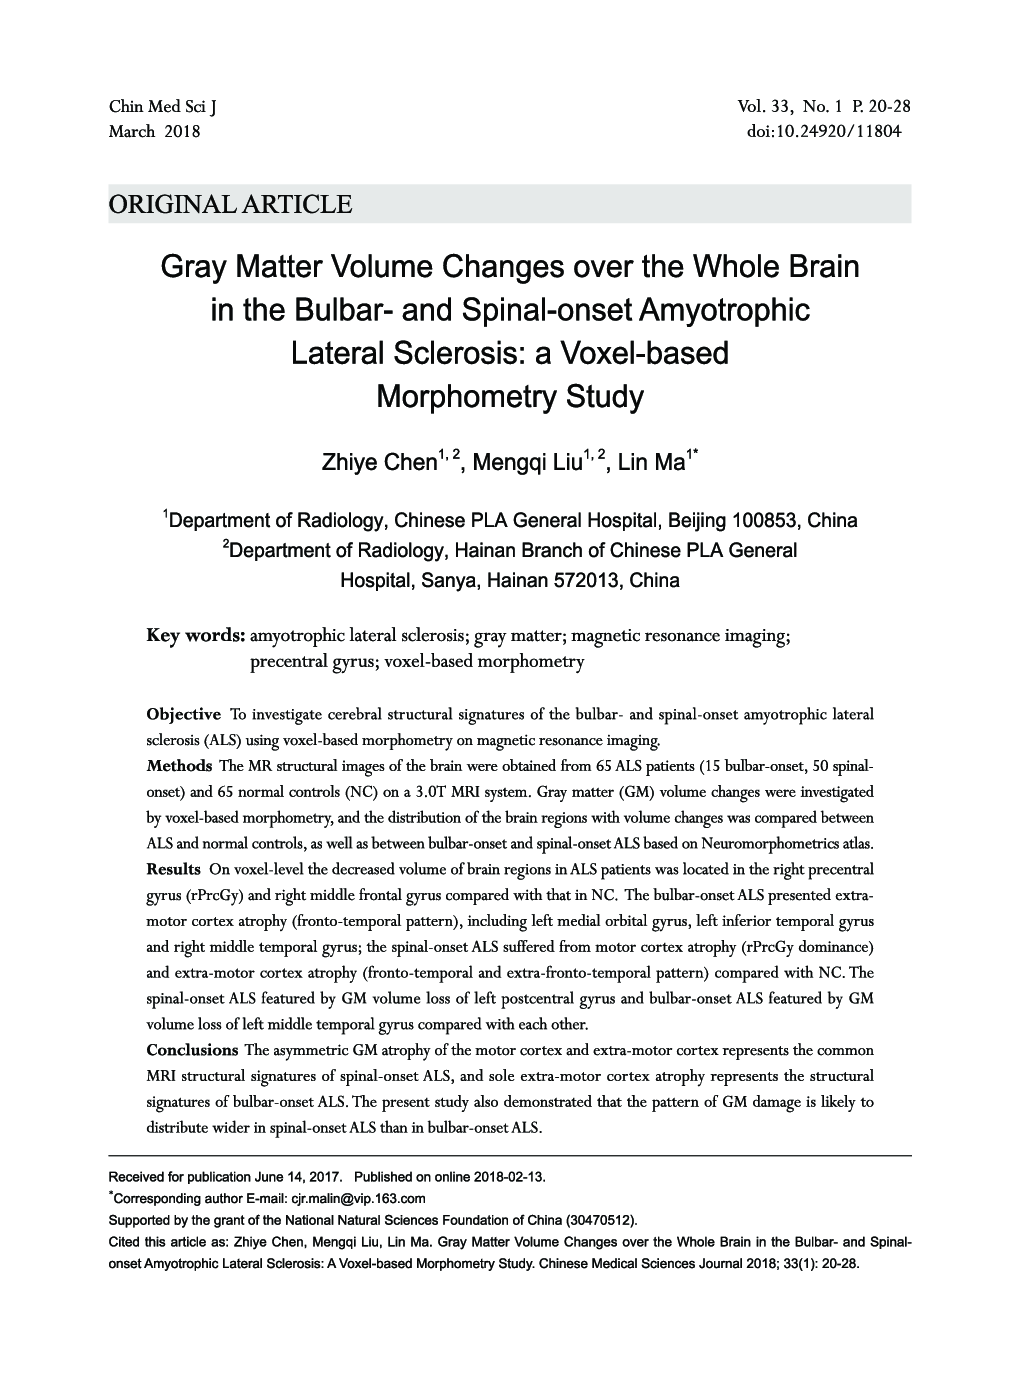 Gray Matter Volume Changes over the Whole Brain in the Bulbar- and Spinal-onset Amyotrophic Lateral Sclerosis: a Voxel-based Morphometry Study